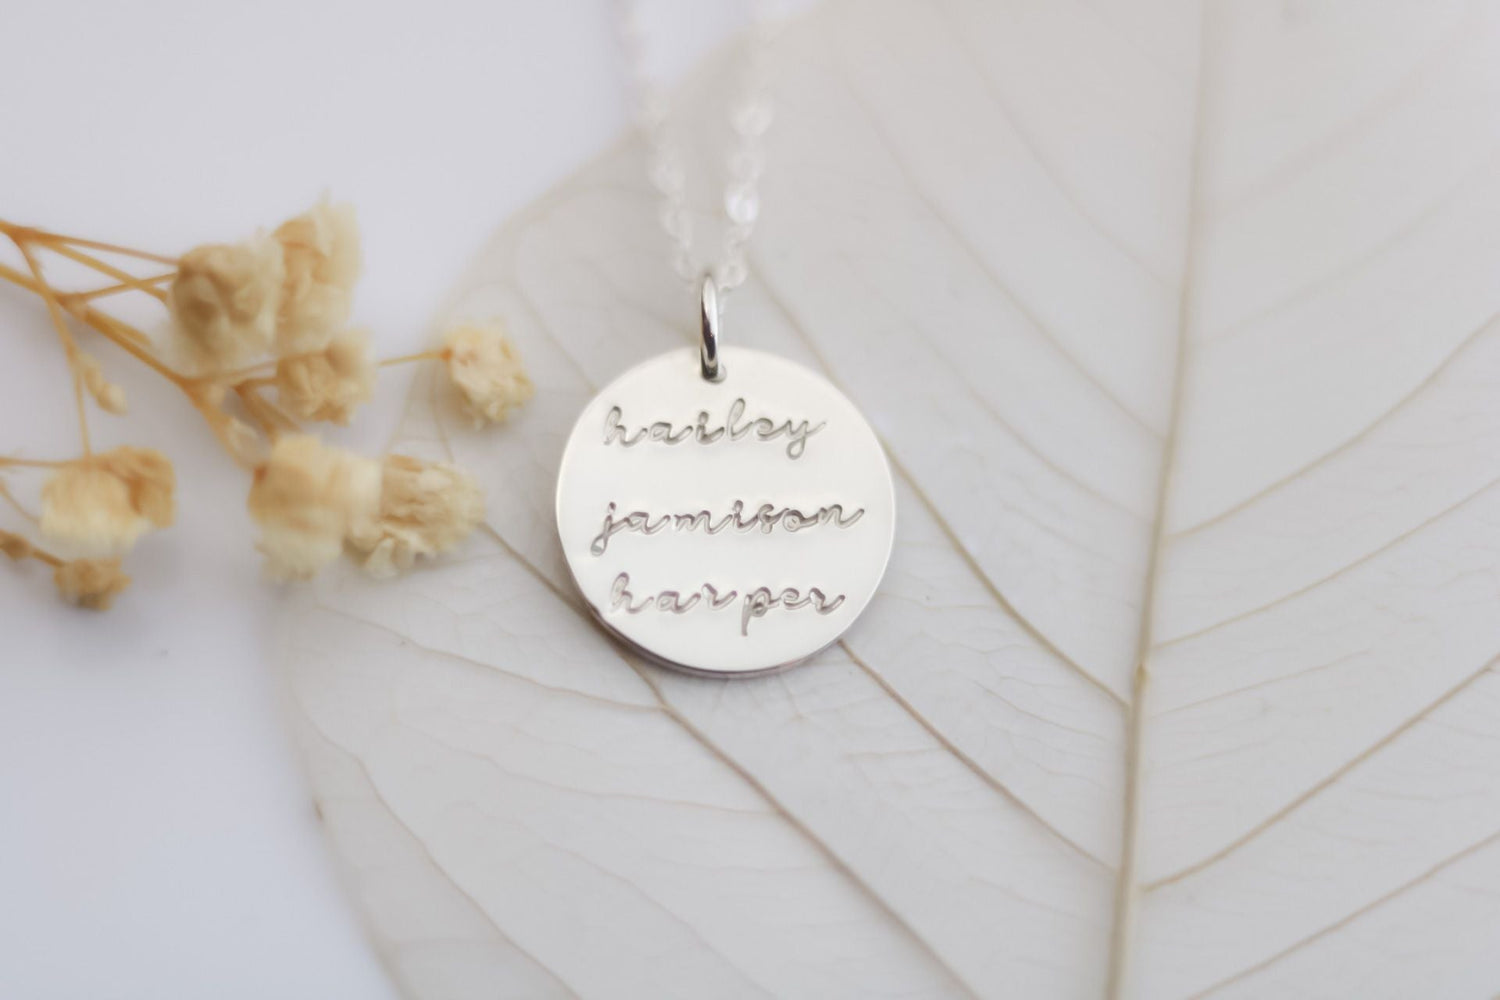 Large Script Name Disc Necklace - TickleBugJewelry